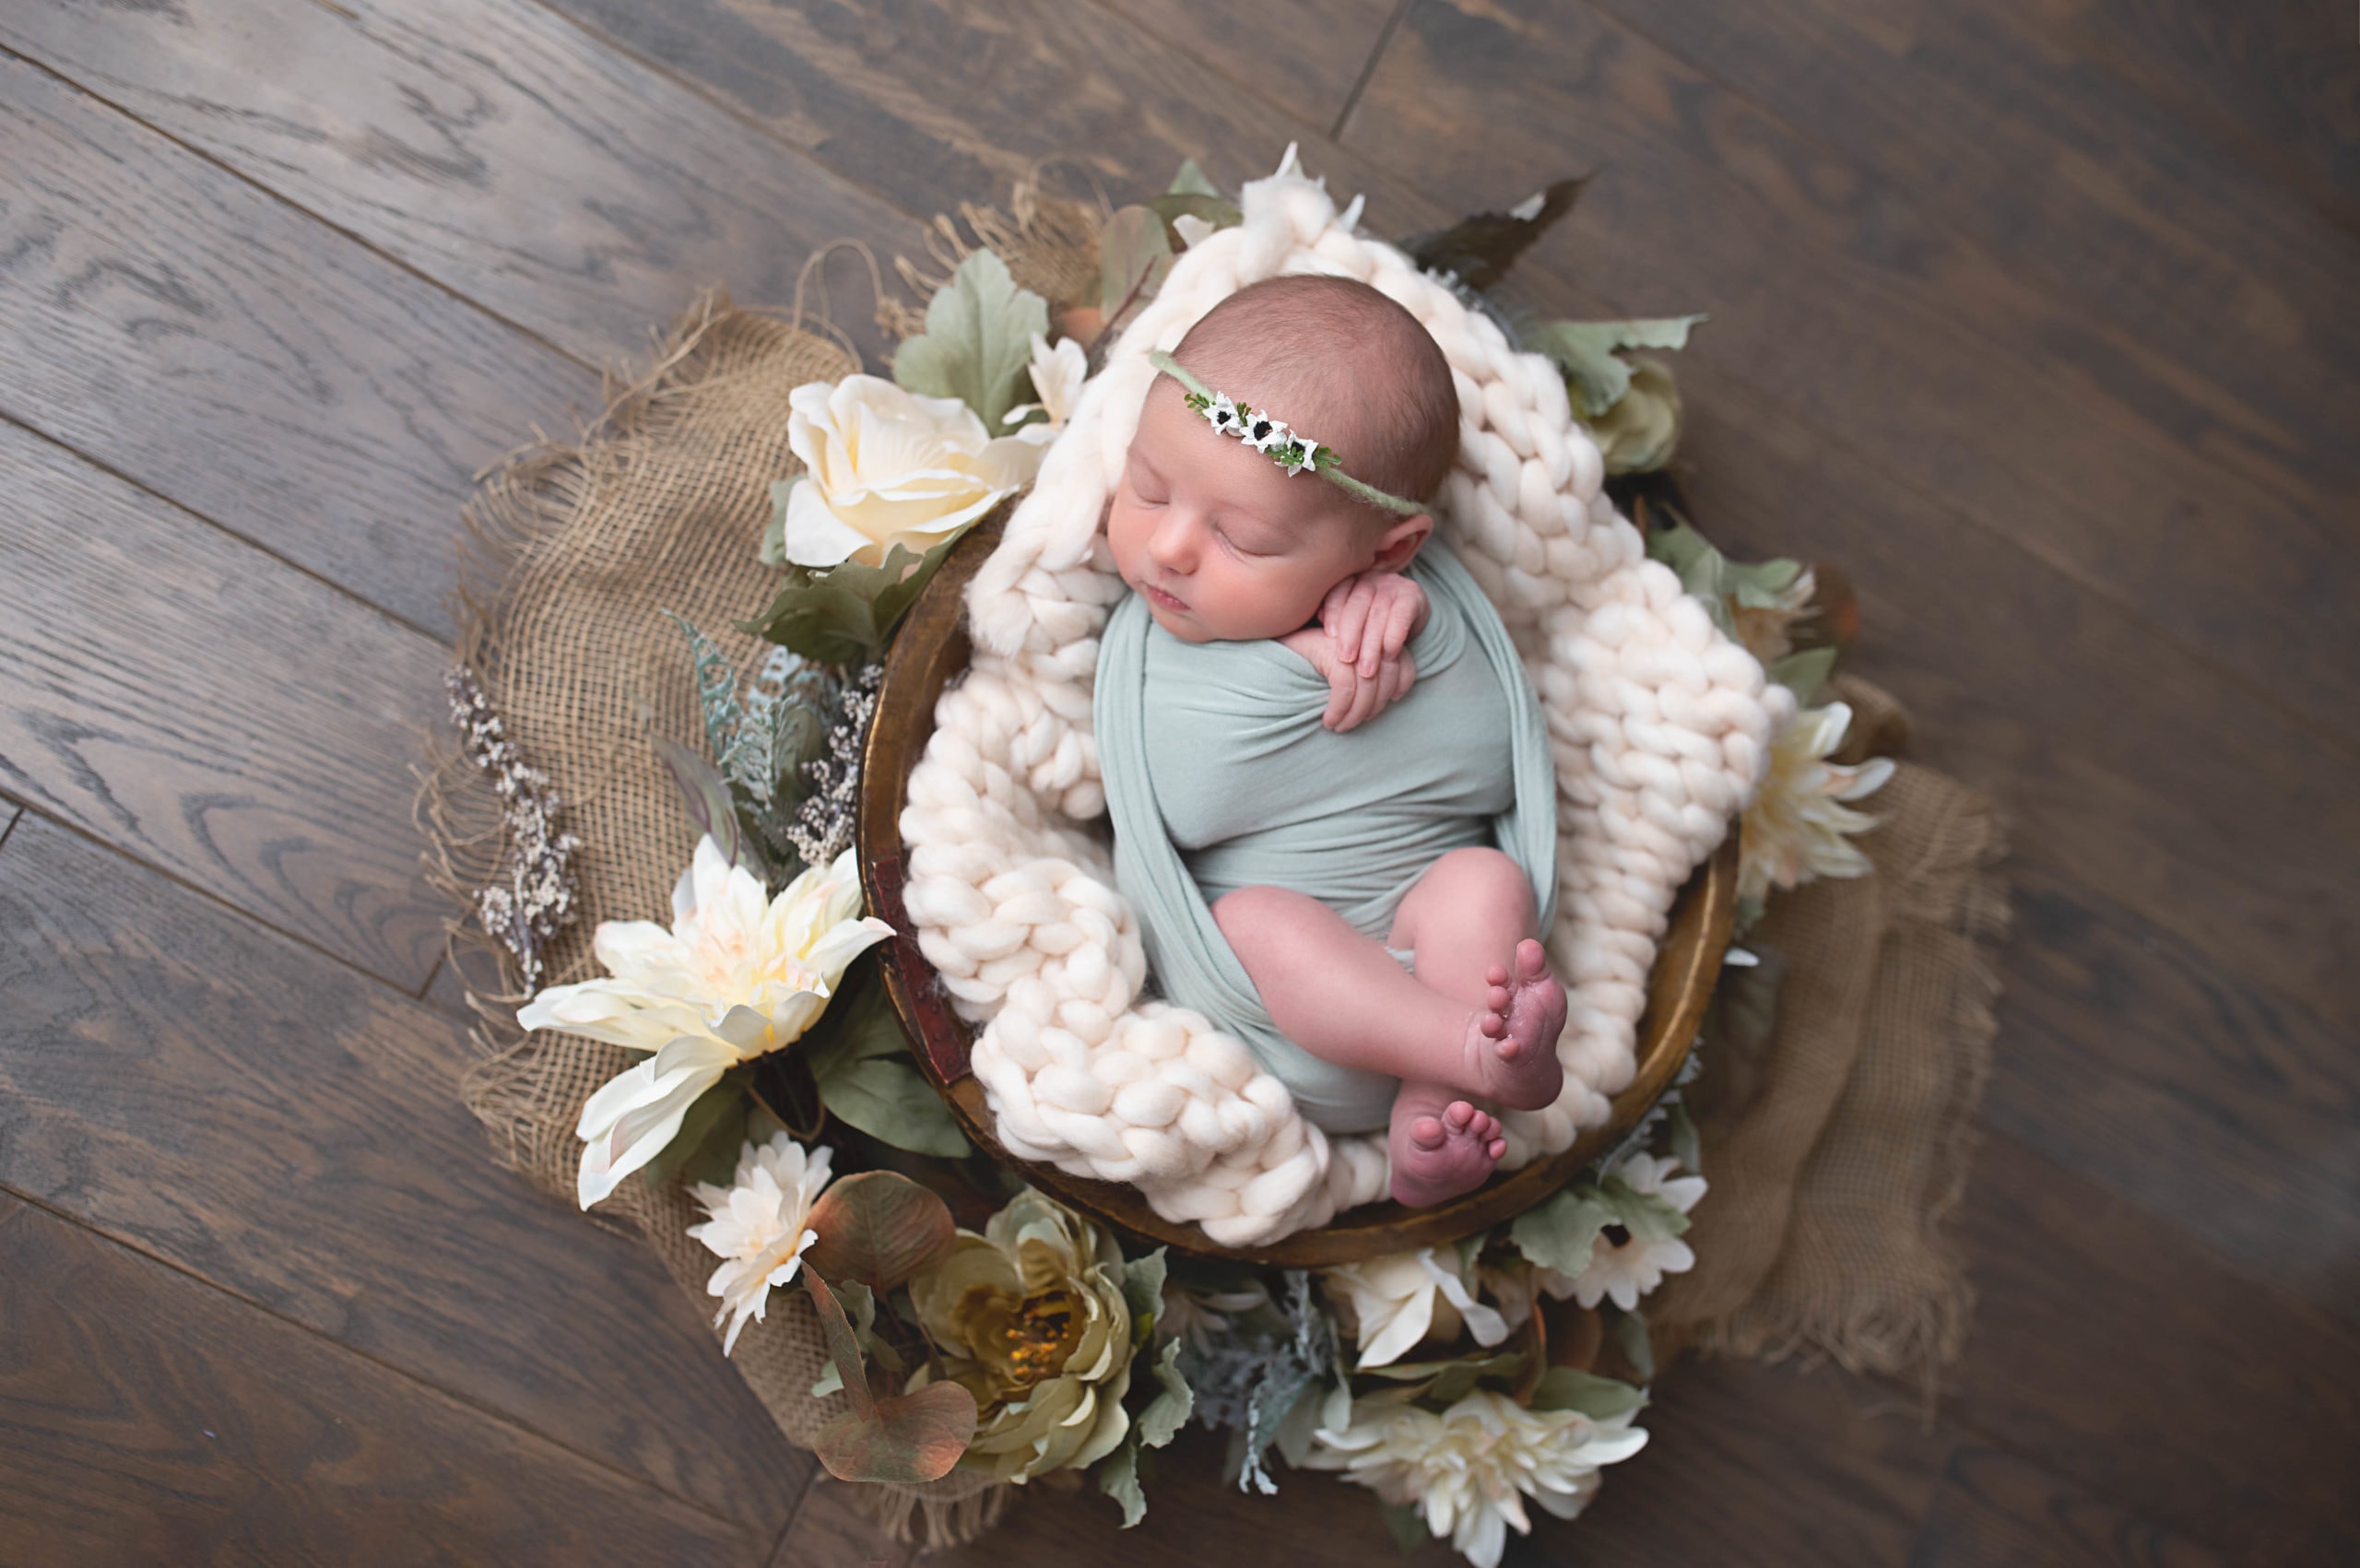 Newborn Photography, baby swaddled up in basket with flowers and a blanket